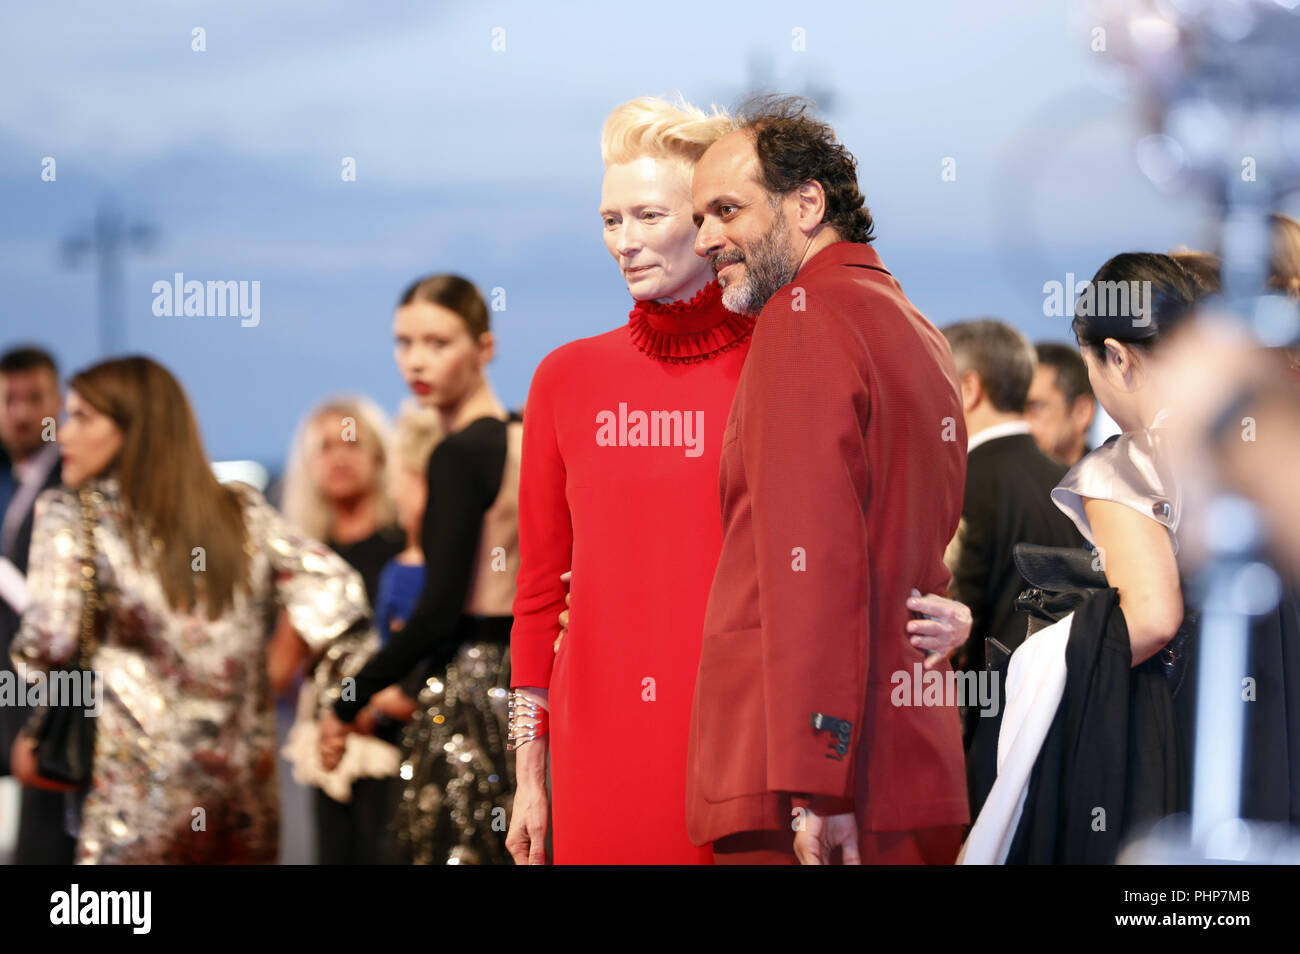 Venice, Italy. 01st Sep, 2018. Tilda Swinton and Luca Guadagnino attending the 'Suspiria' premiere at the 75th Venice International Film Festival at the Palazzo del Cinema on September 01, 2018 in Venice, Italy. | usage worldwide Credit: dpa/Alamy Live News Stock Photo